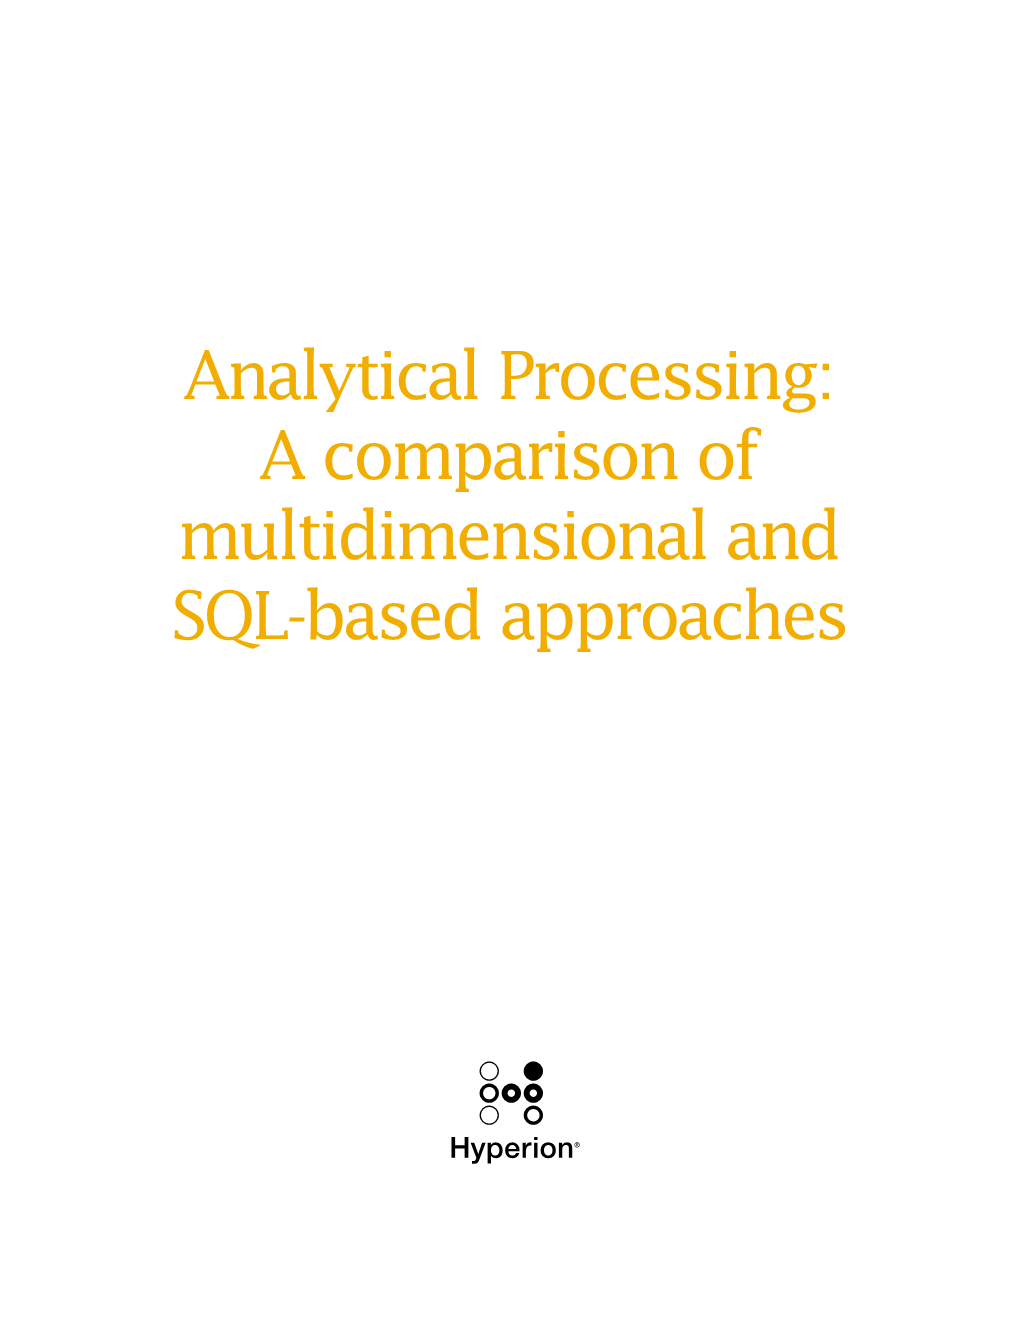 Analytical Processing: a Comparison of Multidimensional and SQL-Based Approaches Contents